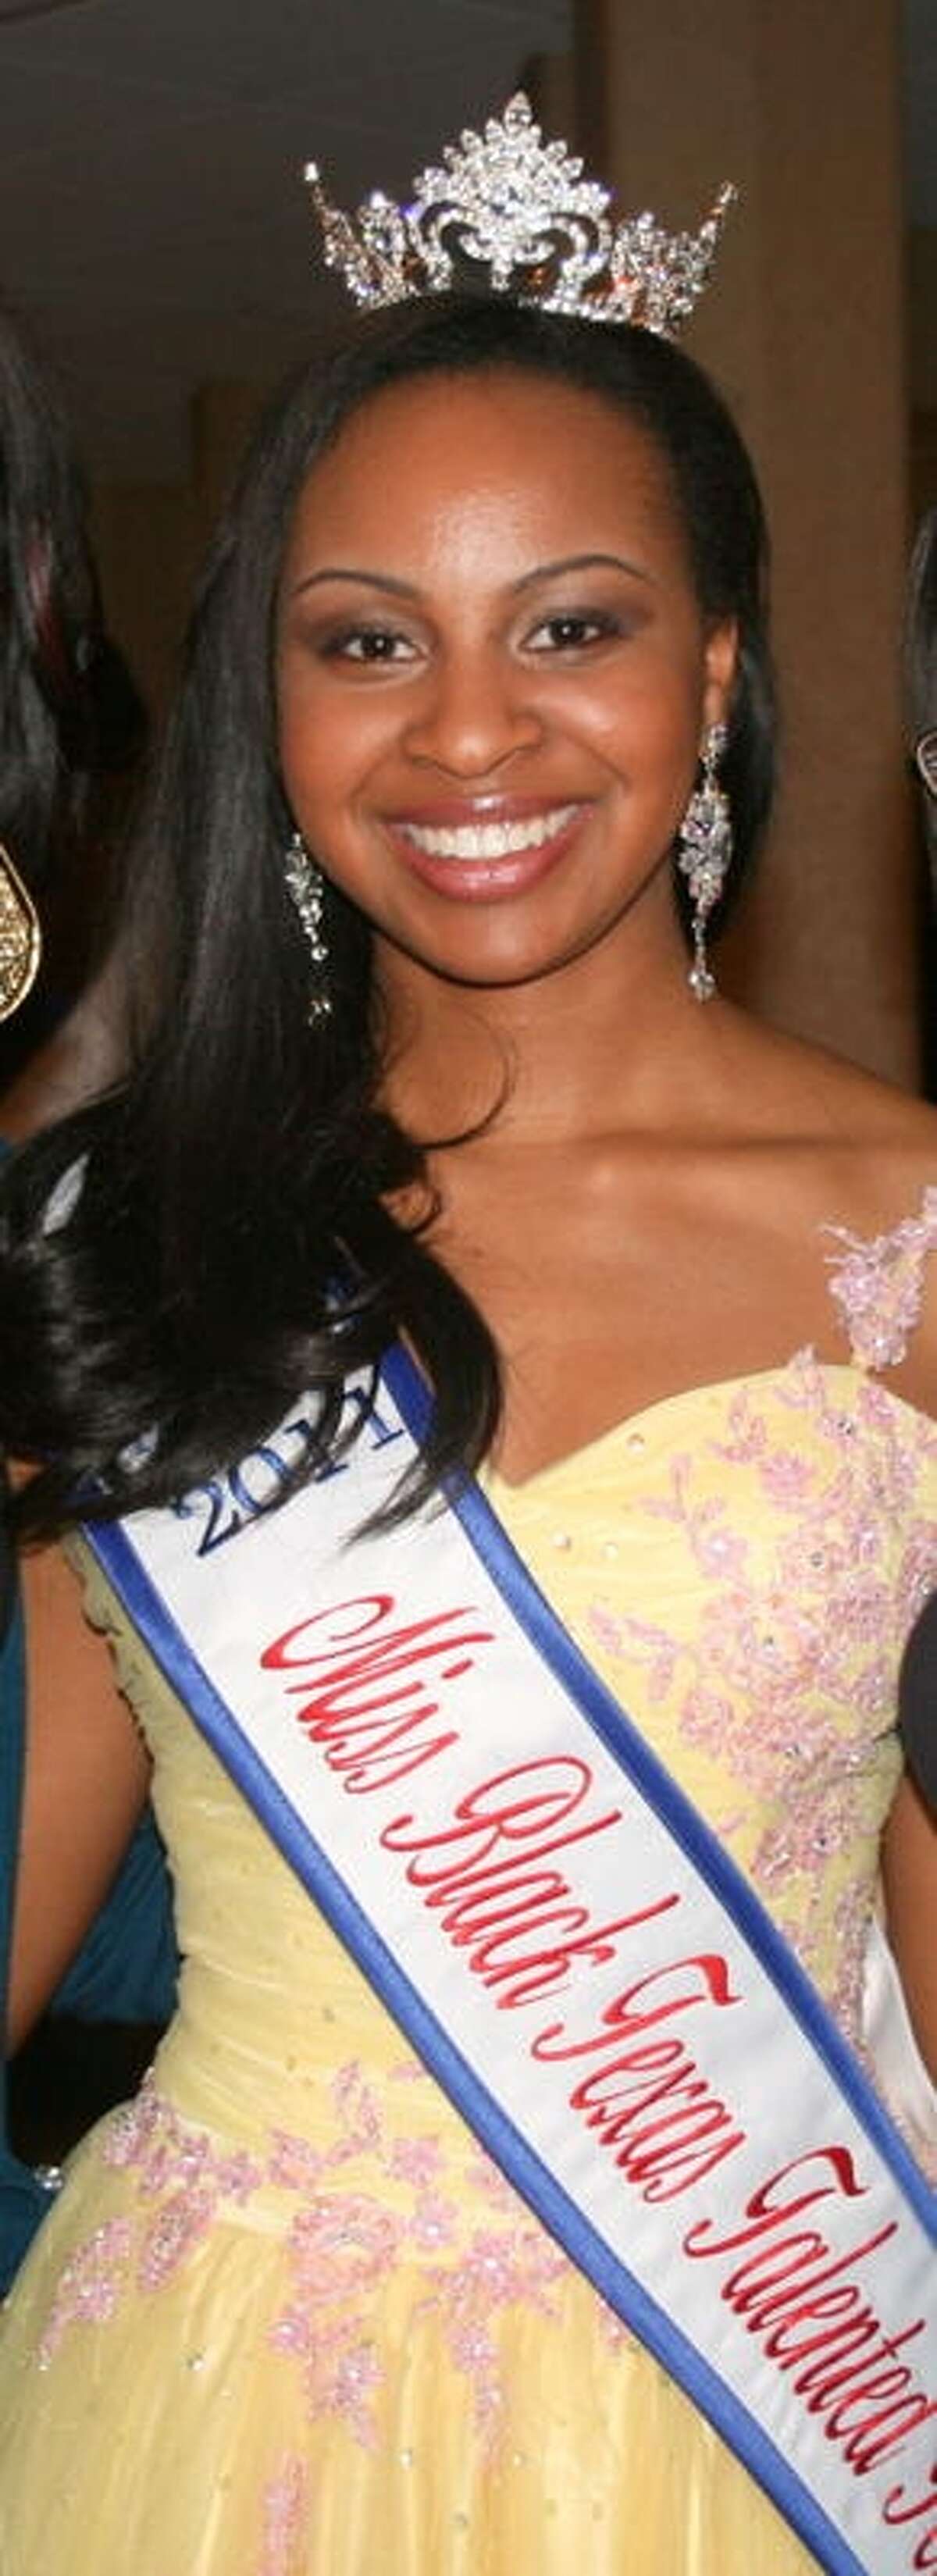 Selena Mitchell was crowned 2011 Miss Black Texas Talented Teen in Houston last year. Courtesy photo